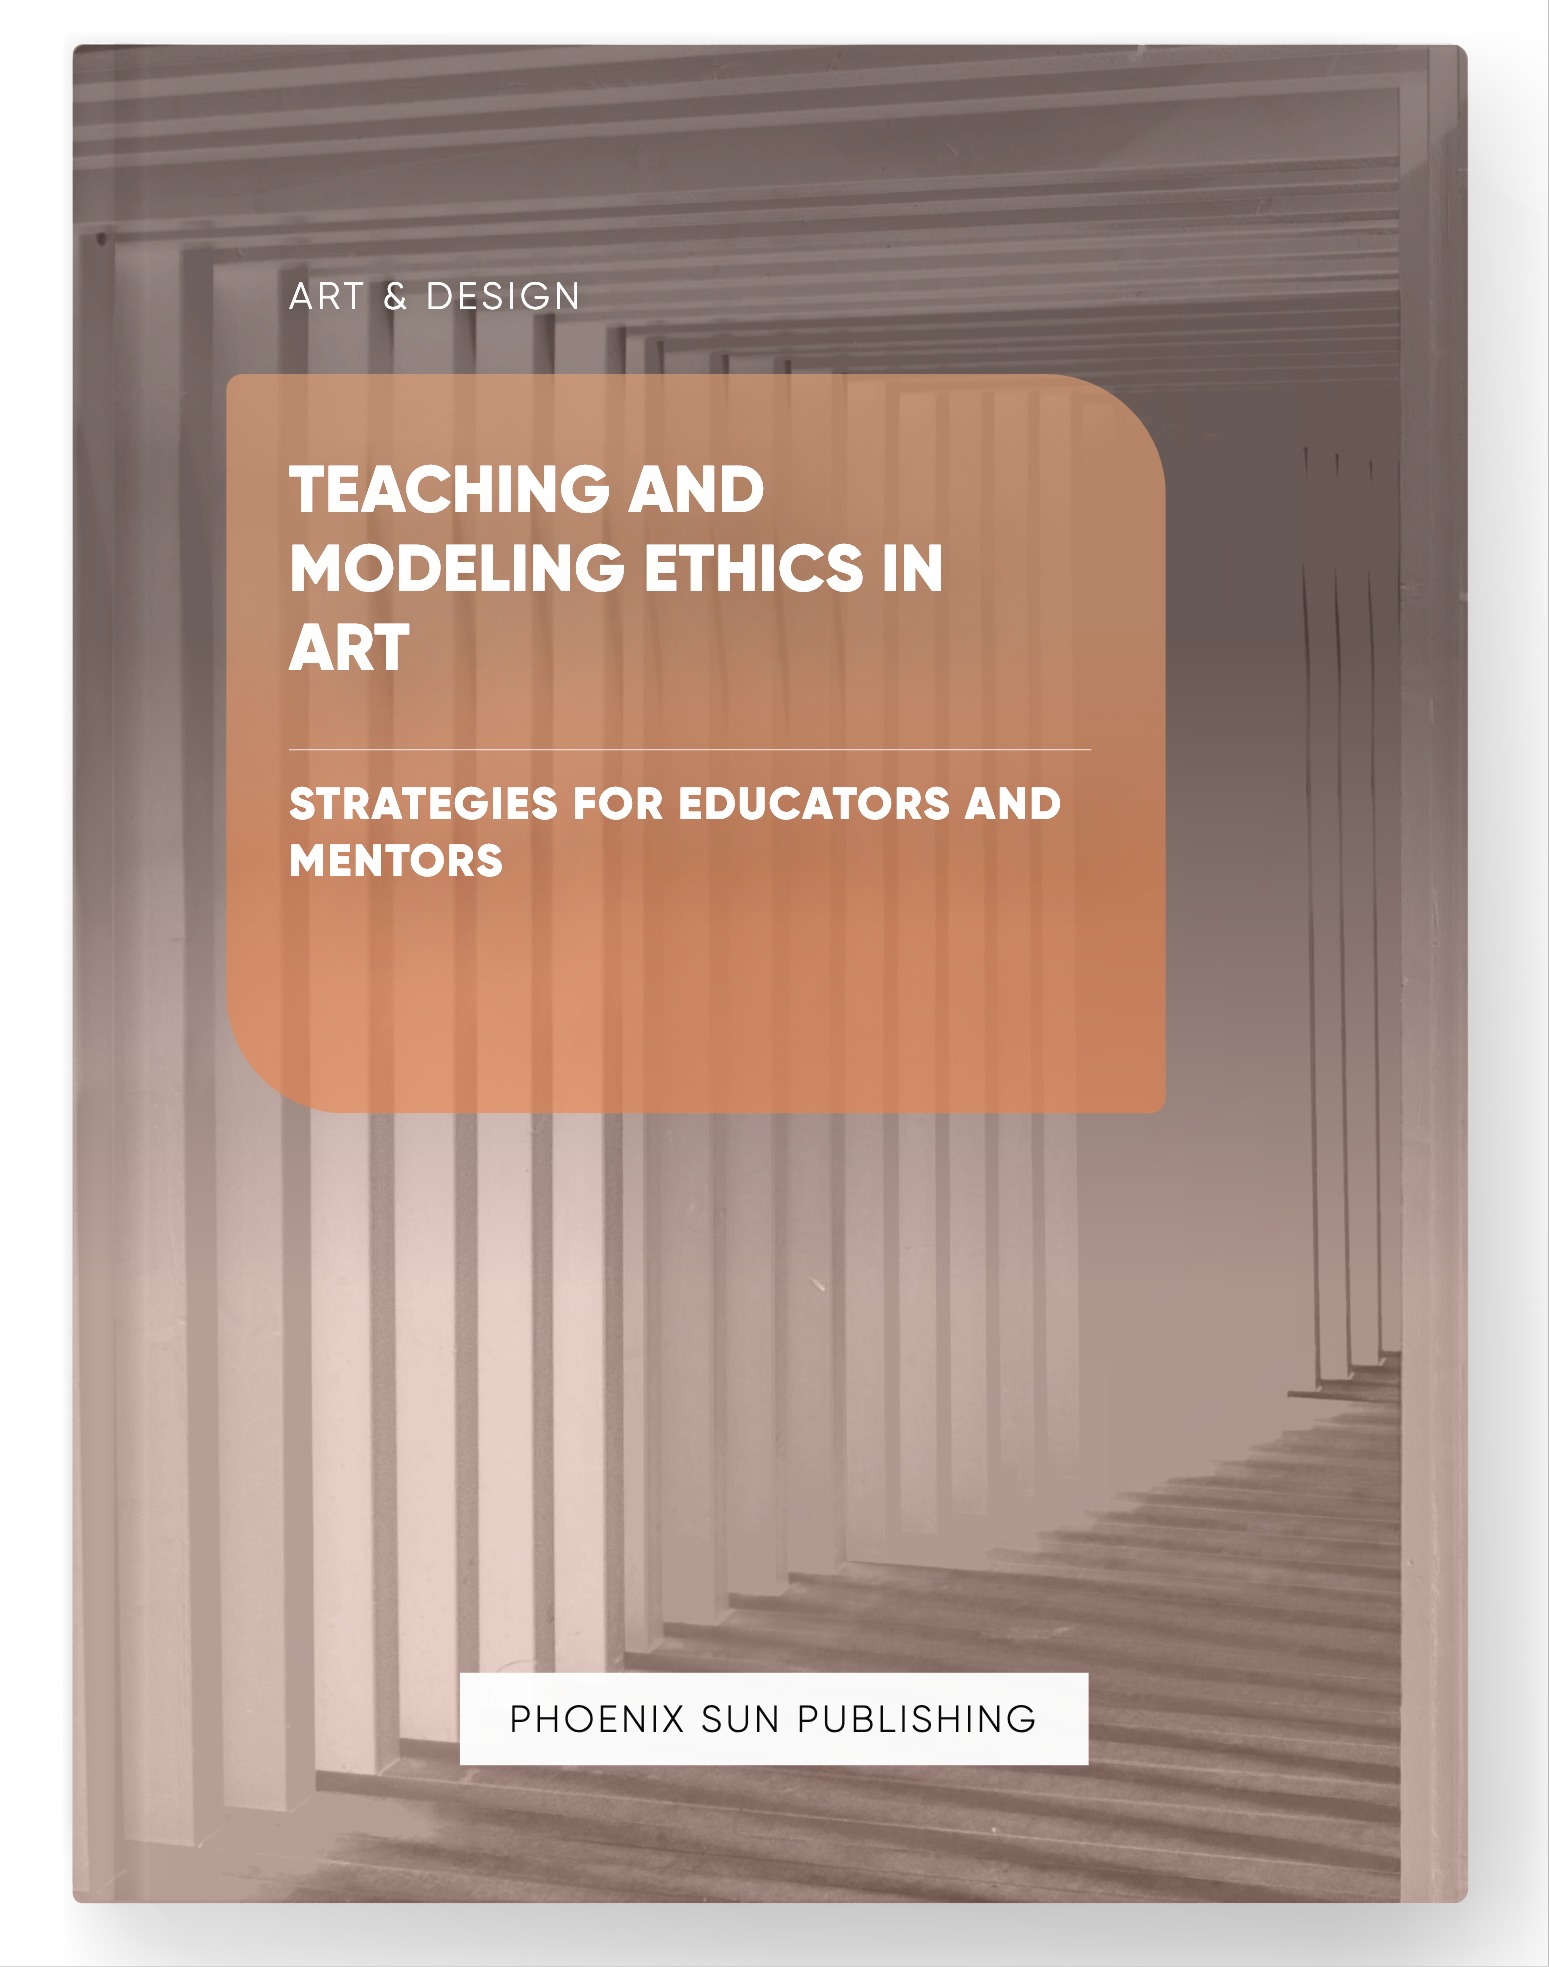 Teaching and Modeling Ethics in Art – Strategies for Educators and Mentors